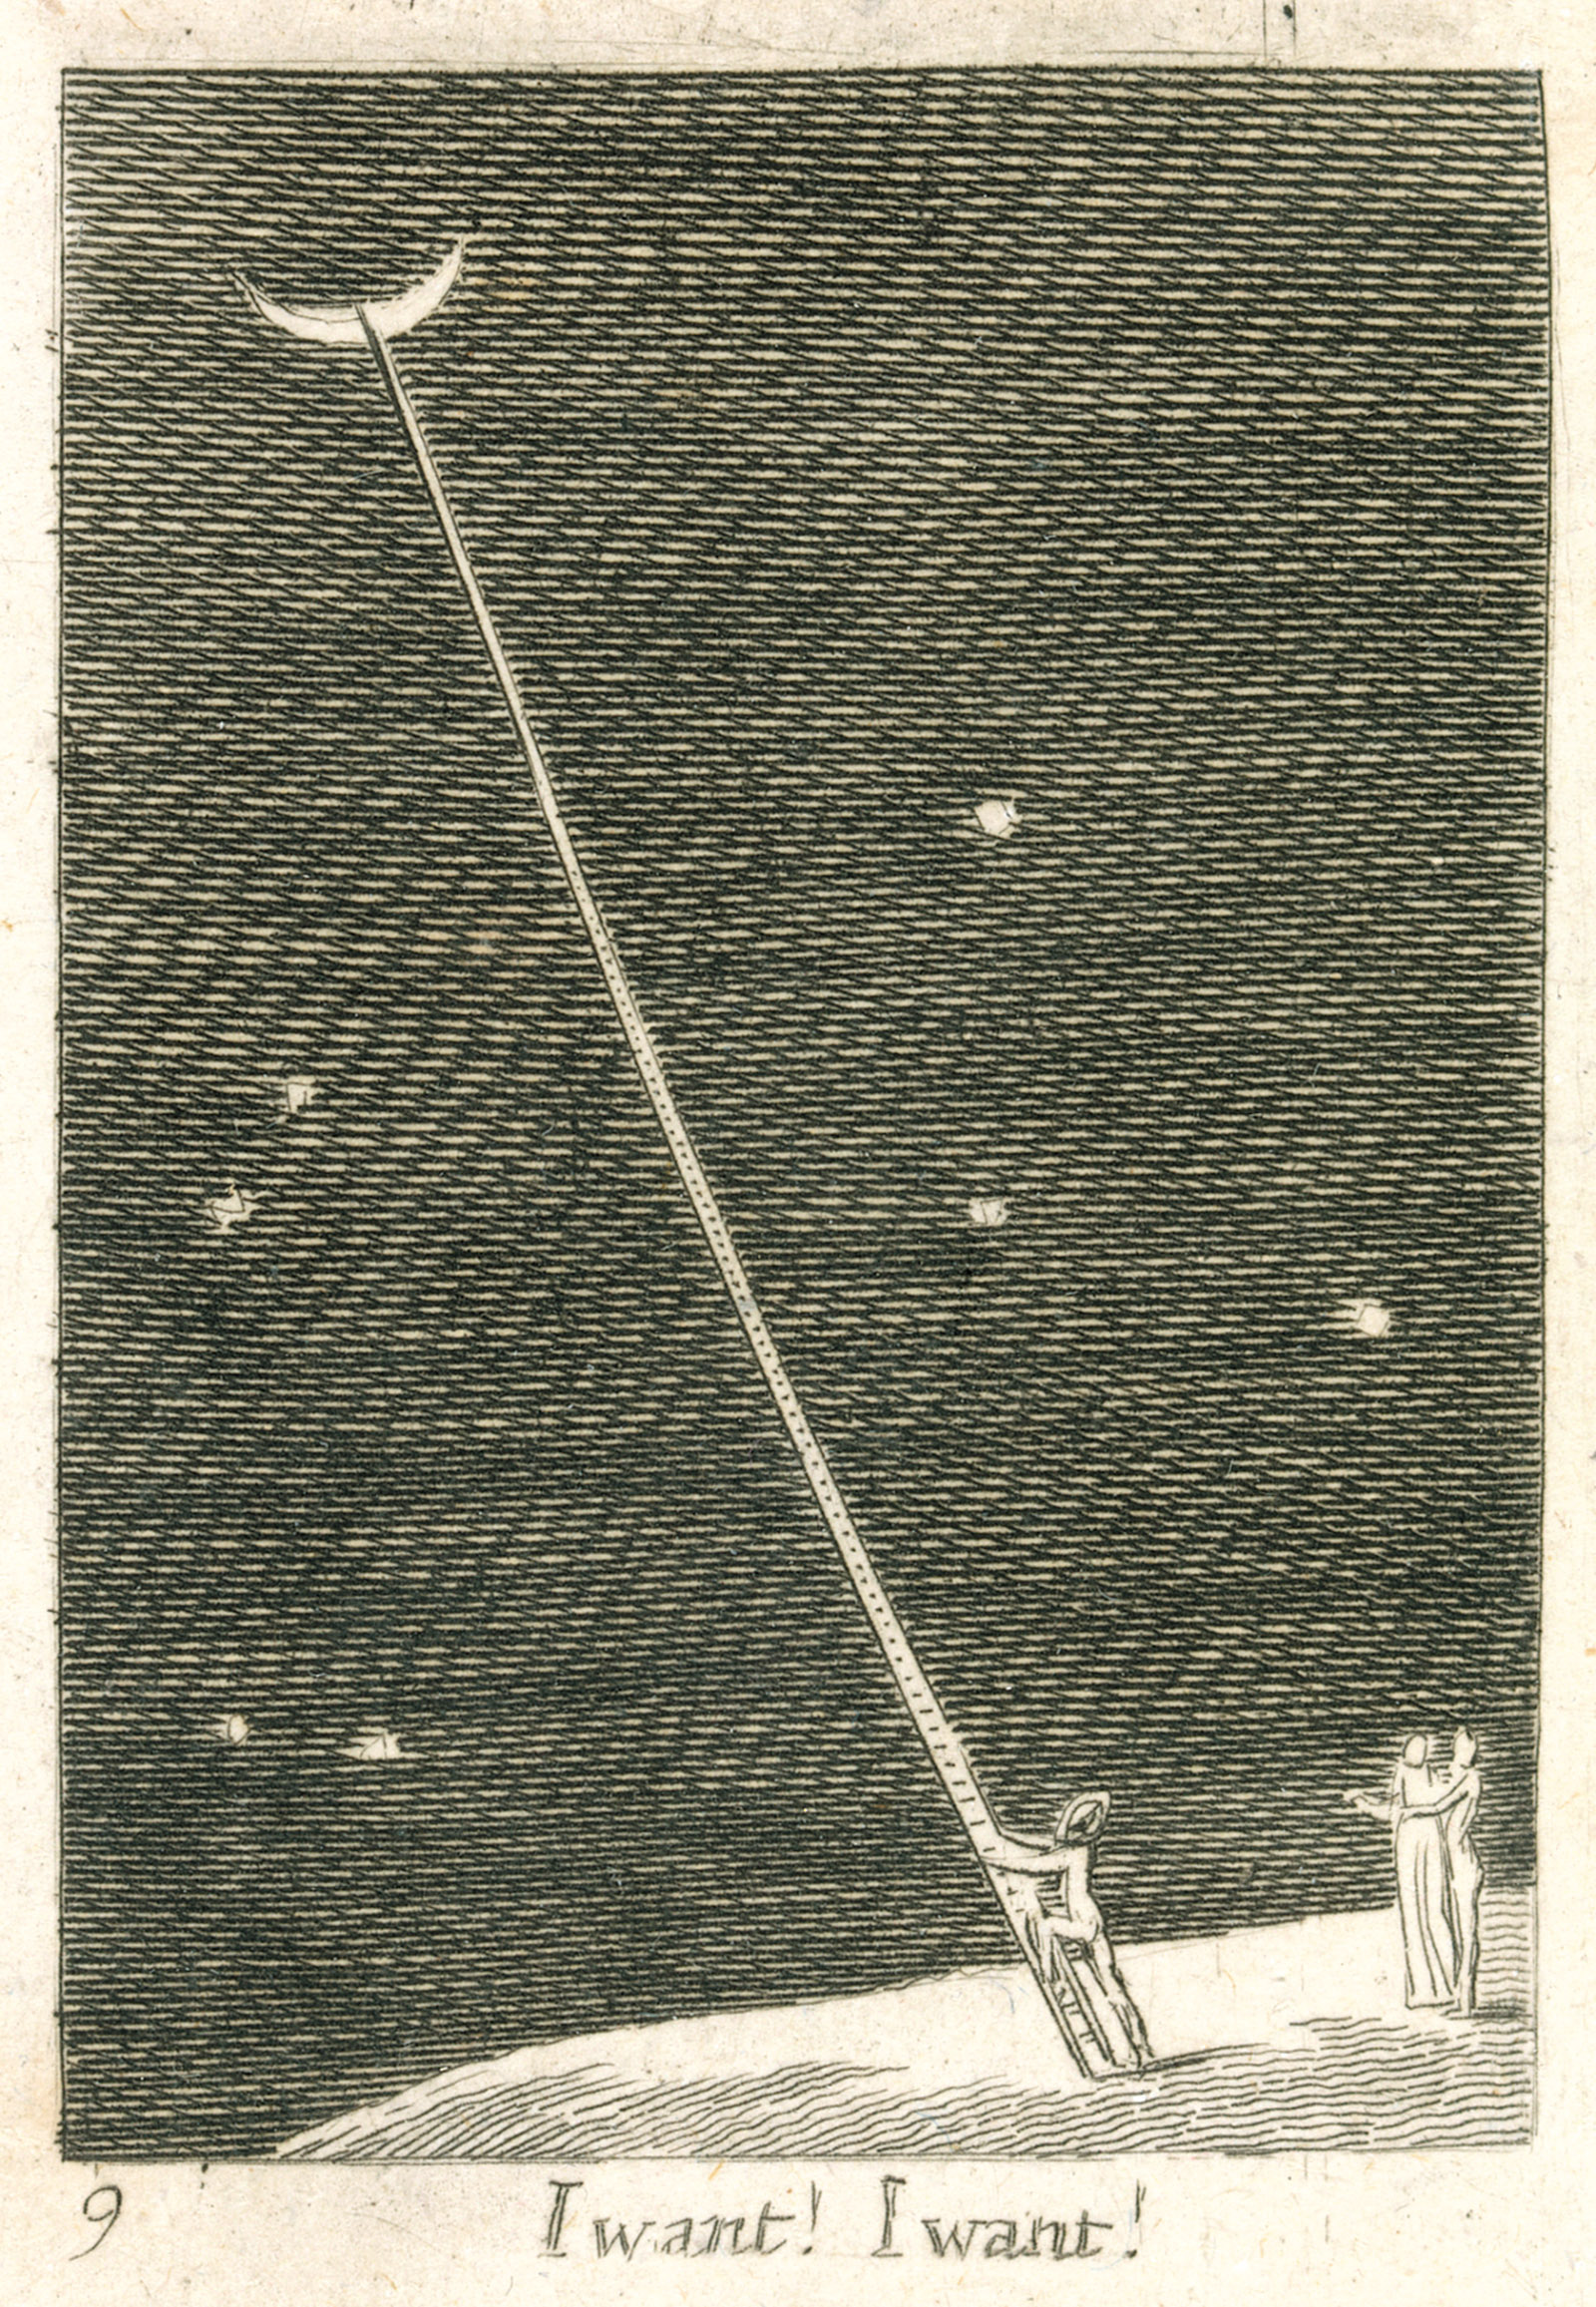 William Blake's illustration of a ladder to the moon